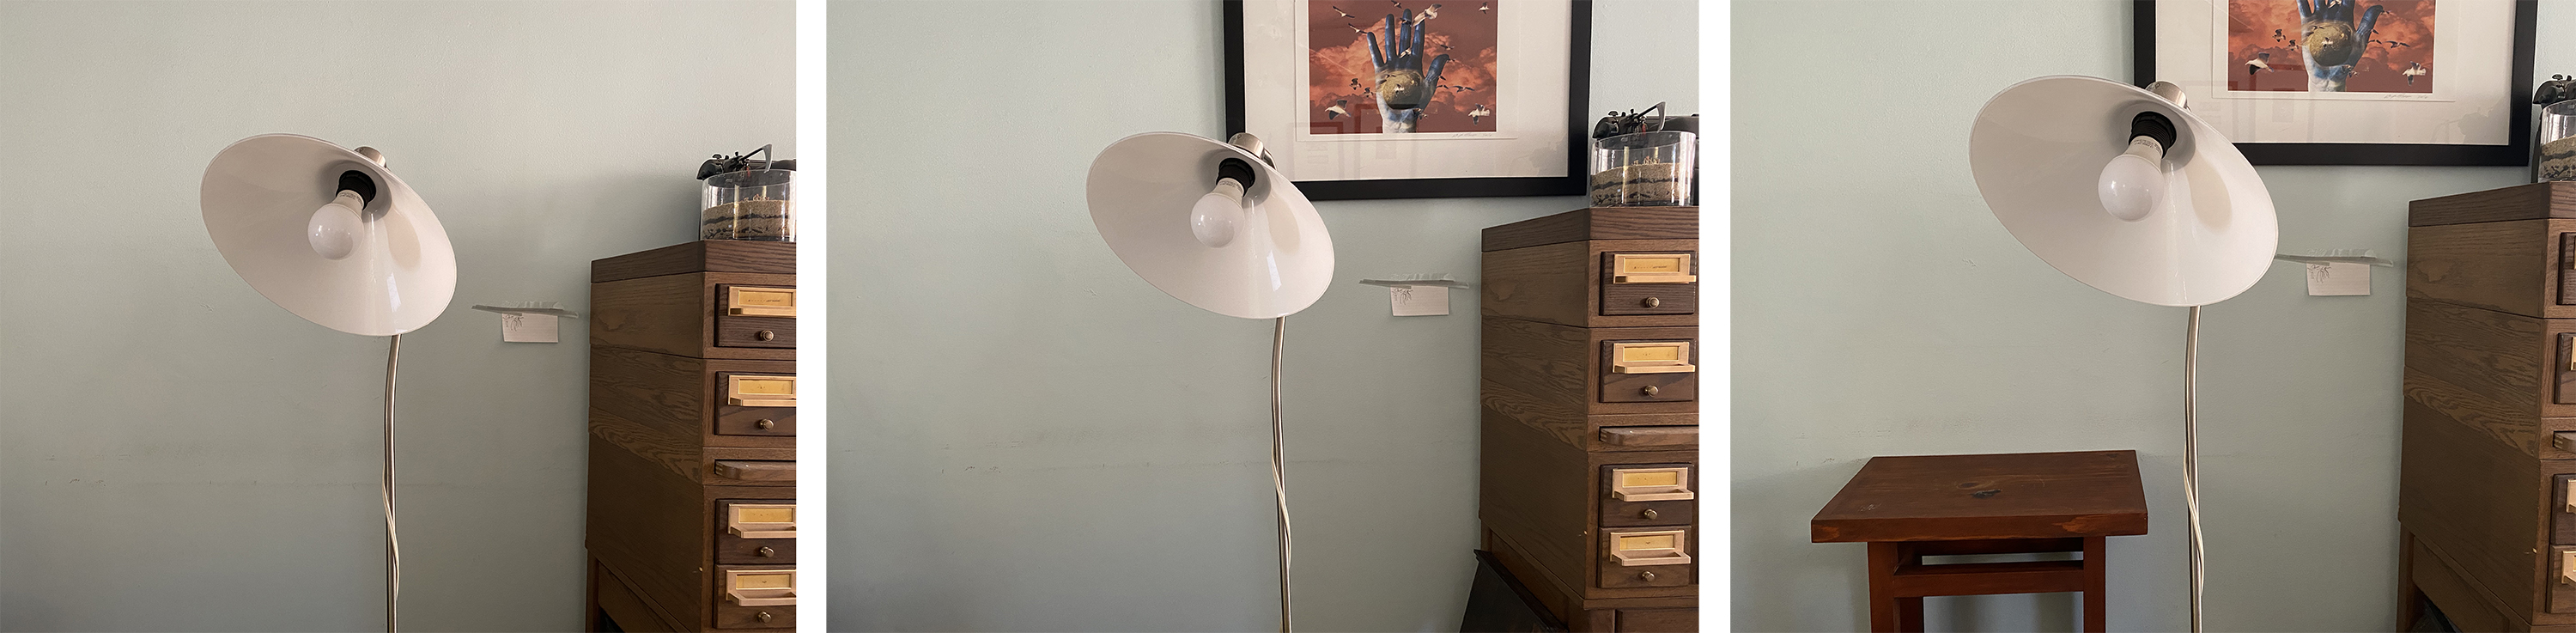 image of a wall with a lamp in front; image of the same wall with a lamp and now a picture is hanging on the wall; image of same space and now a small table is in frame